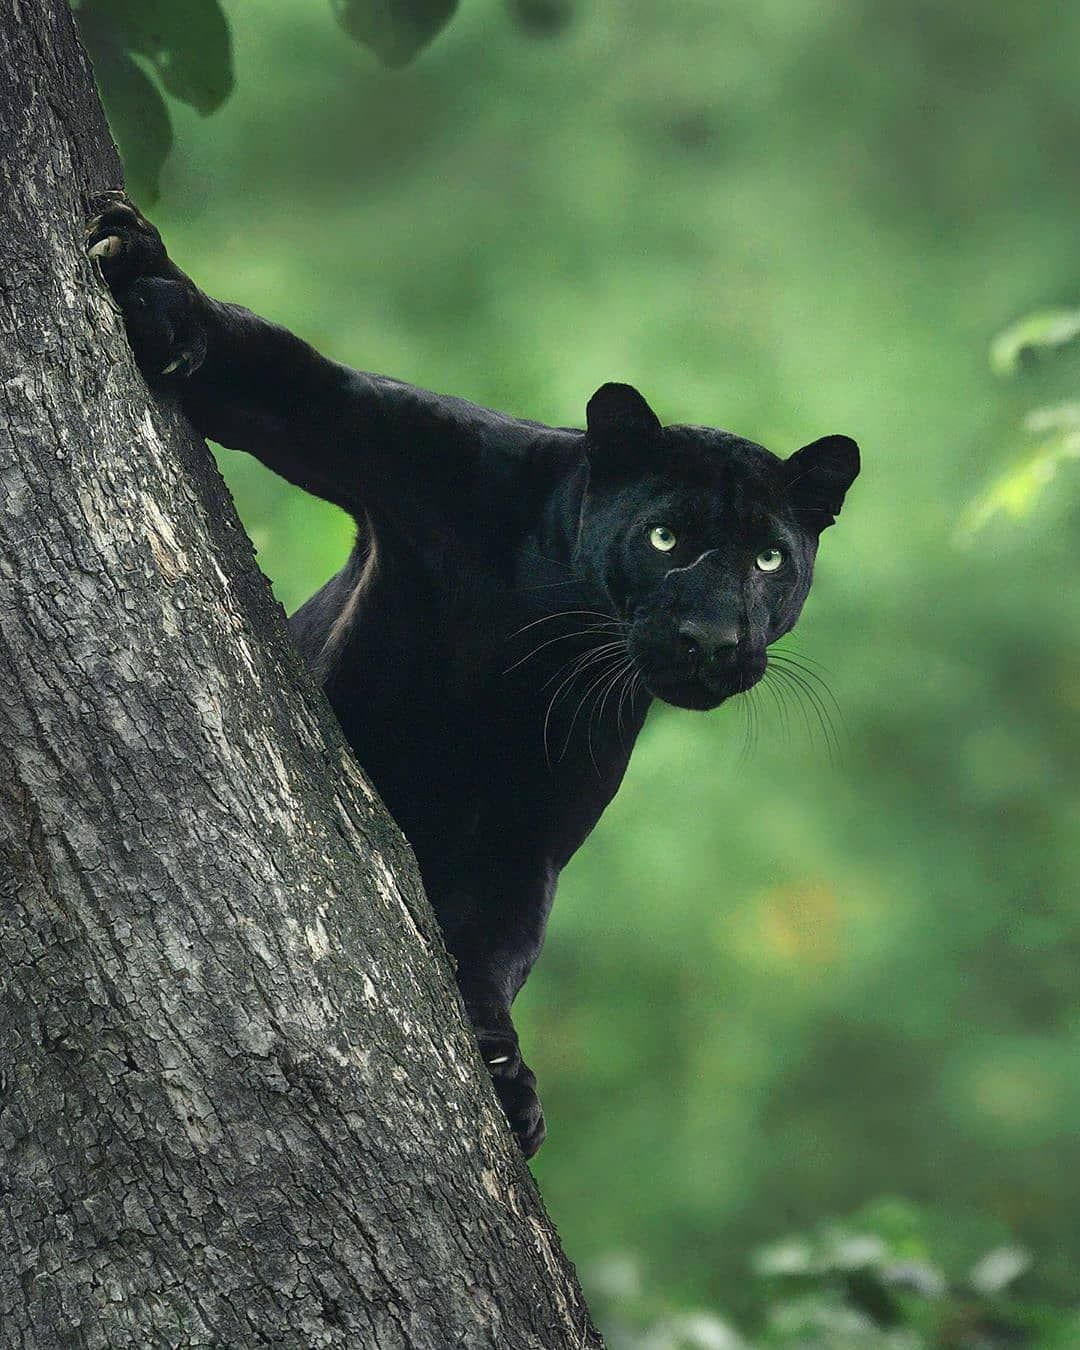 Black panther lurking in the tree / Shaz Jag